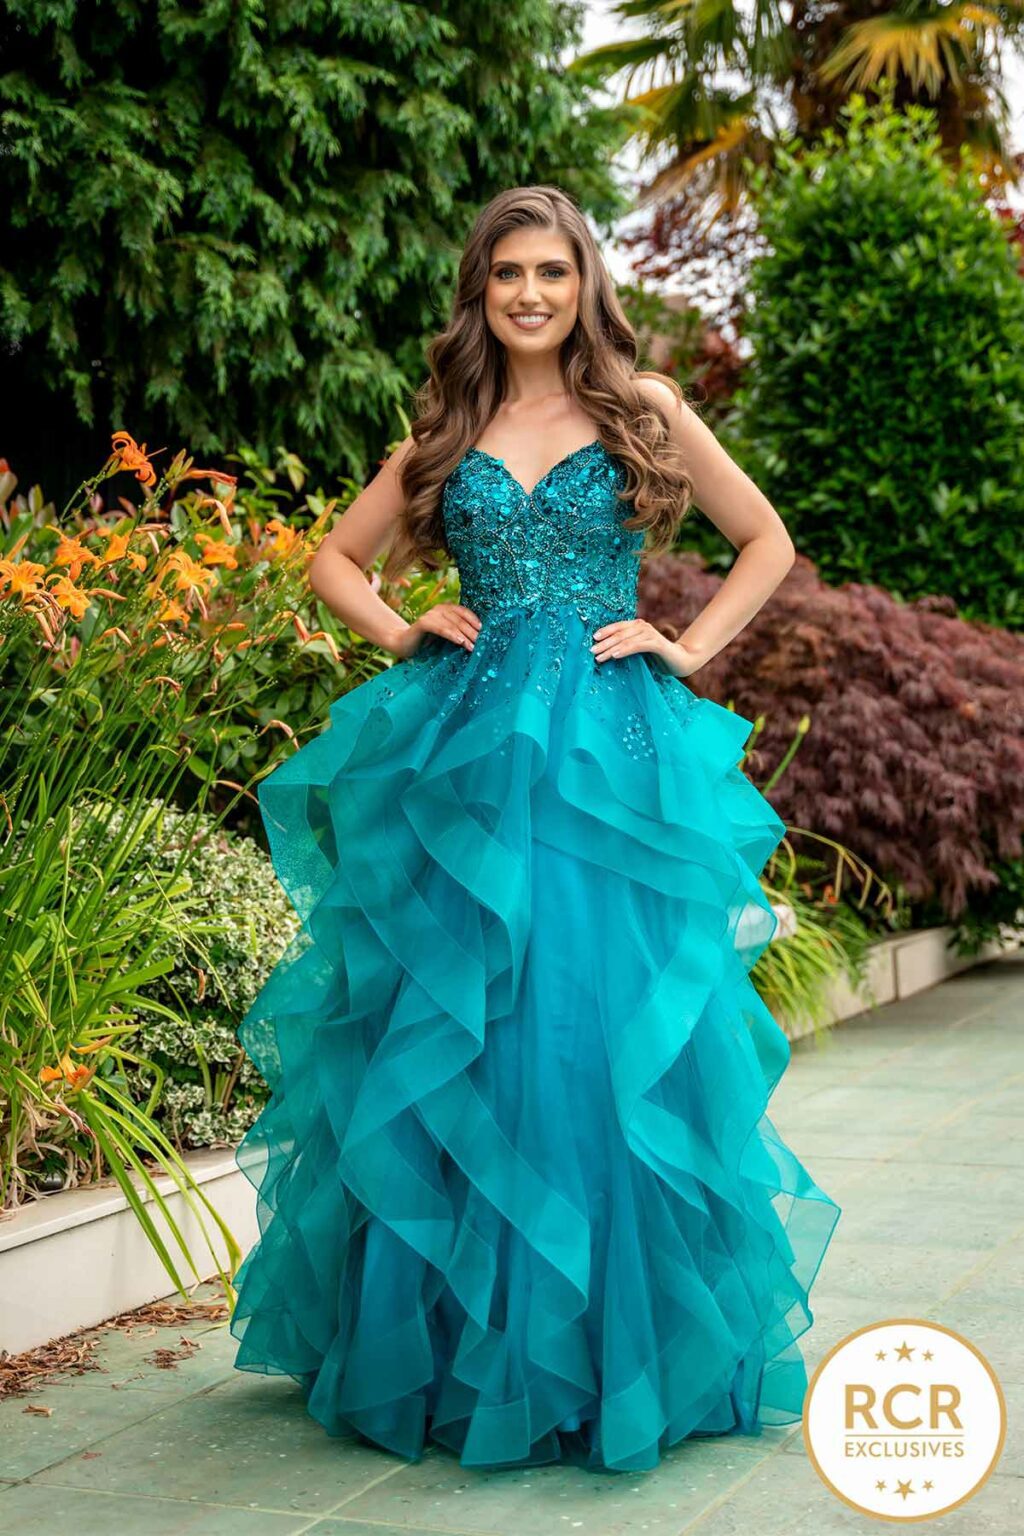 SKY | Teal Ballgown Prom Dress | Red Carpet Ready